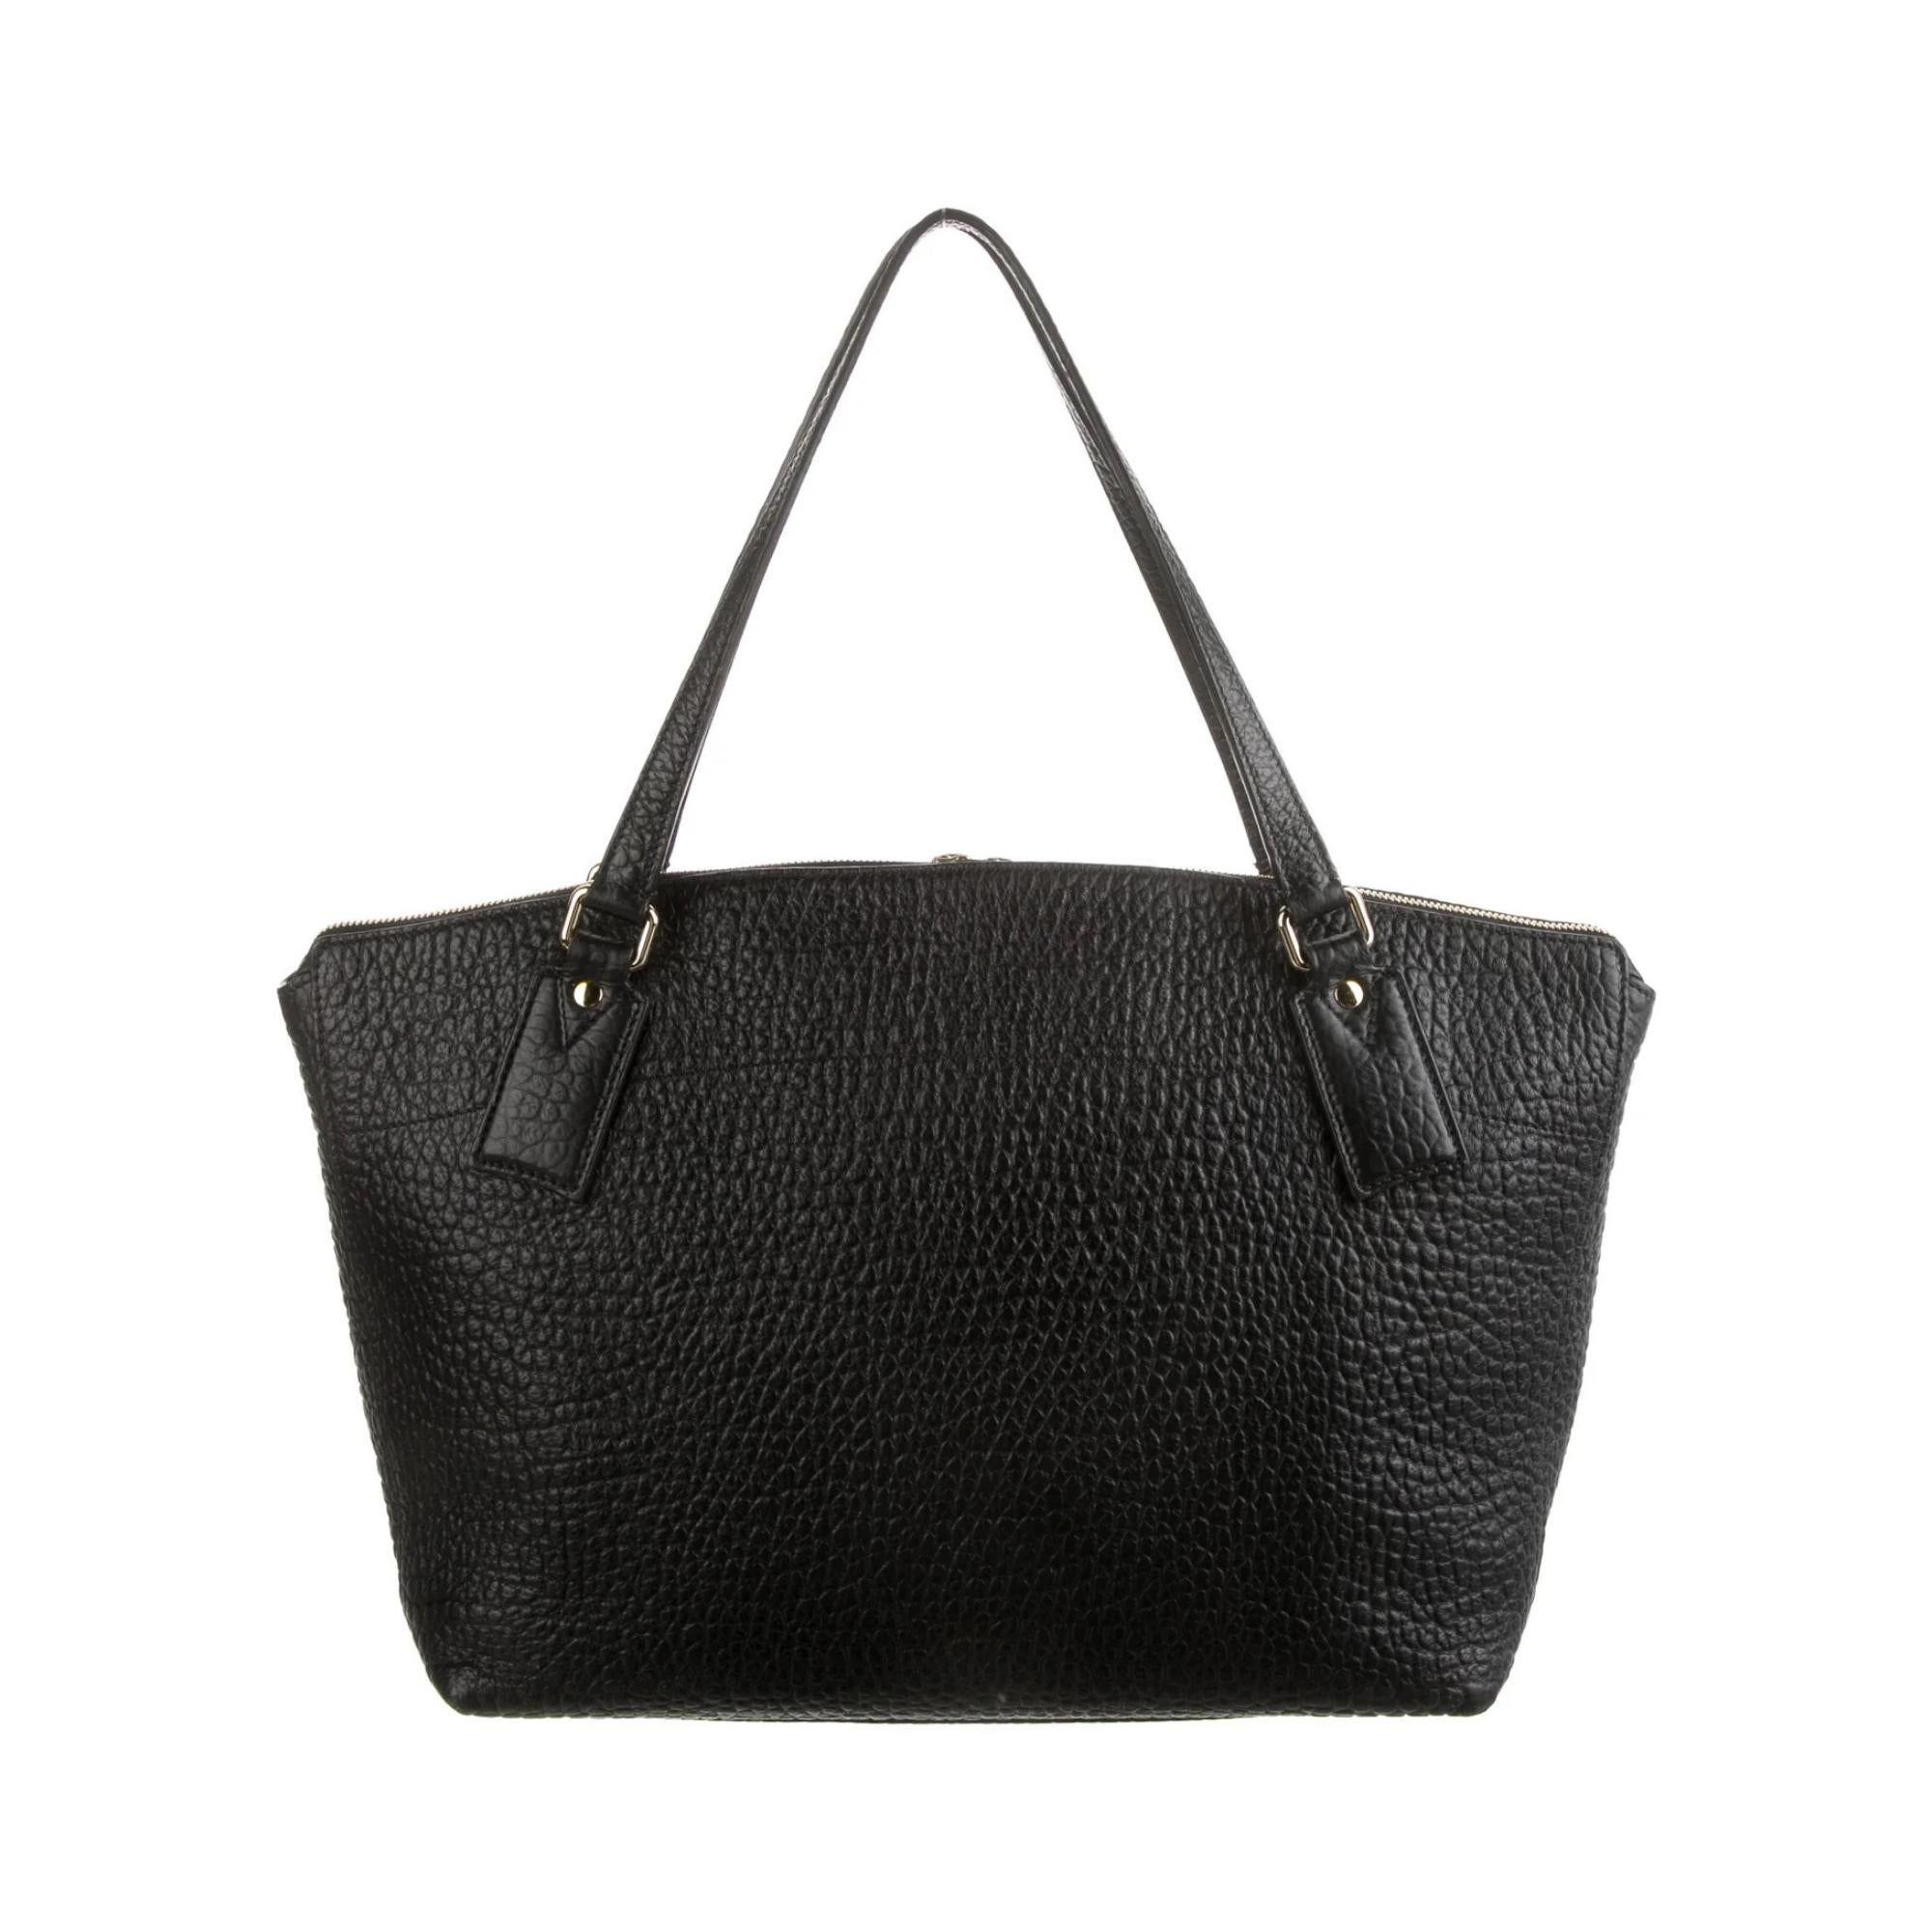 Burberry Grained Leather Black Tote Bag Bag Black In Excellent Condition In Montreal, Quebec